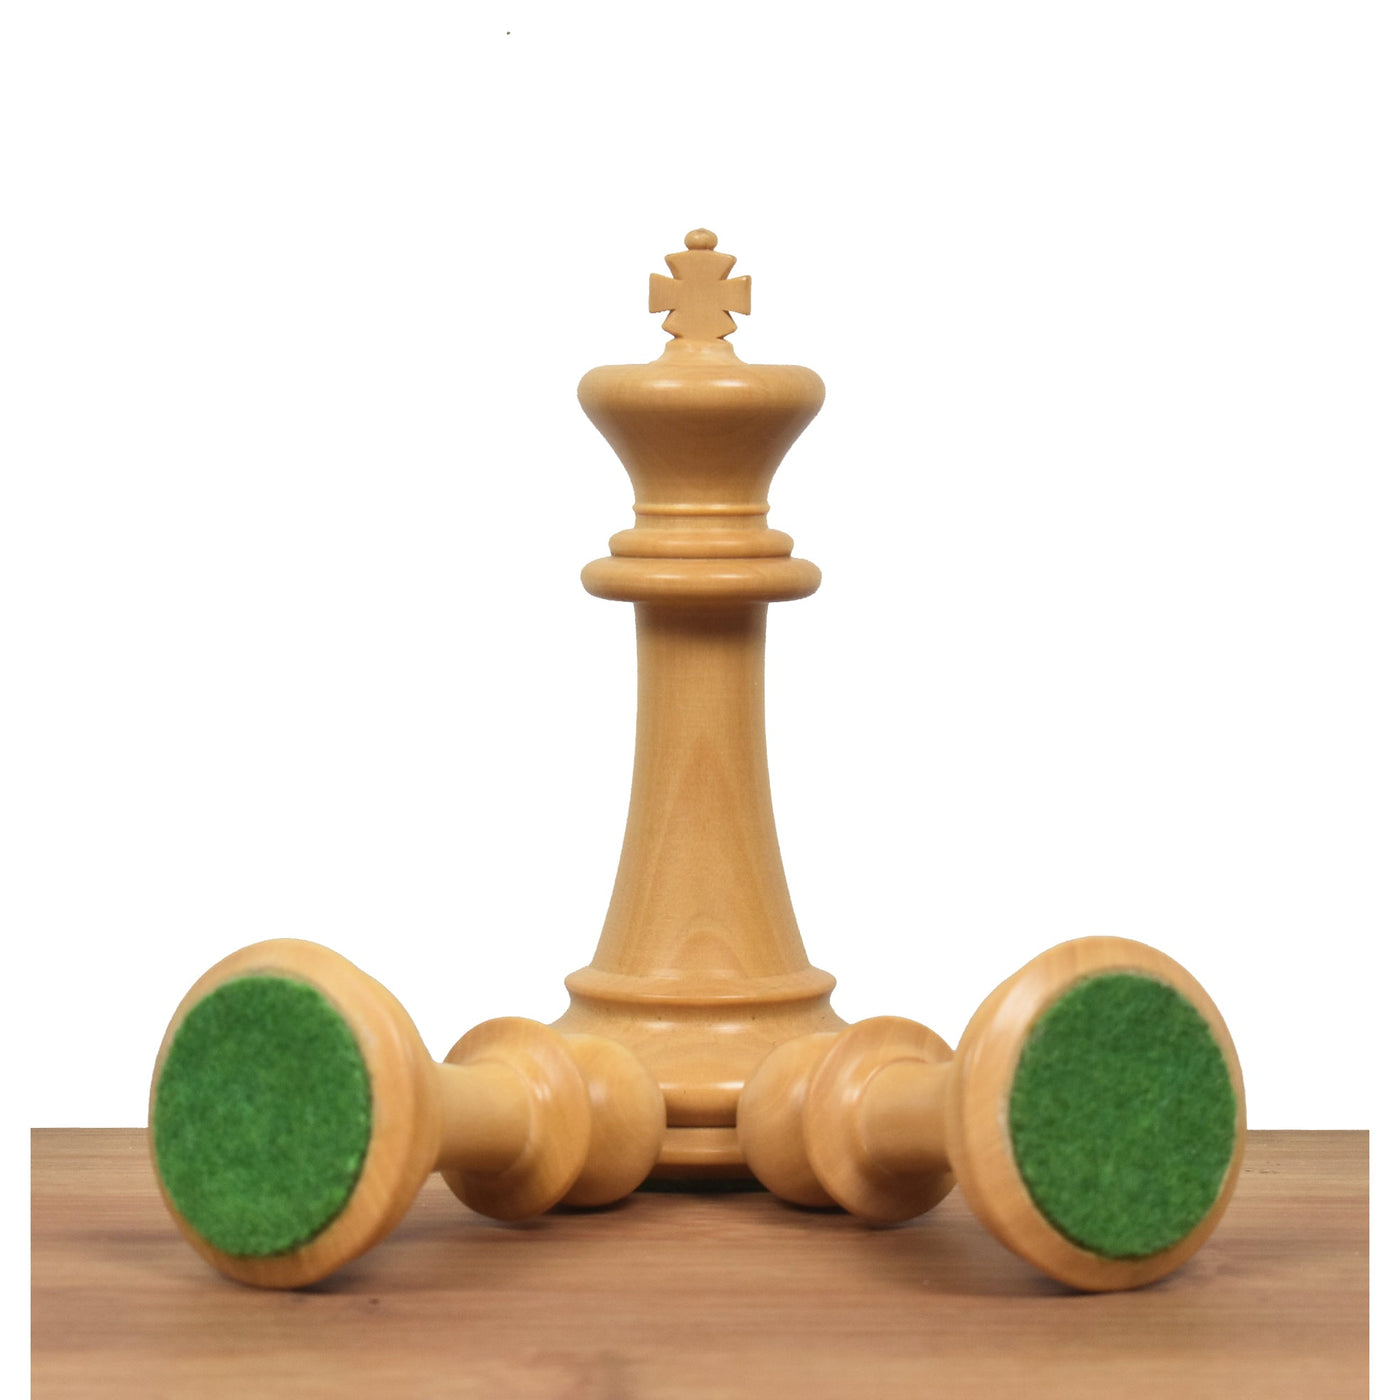 Slightly Imperfect 3.7" Emperor Series Staunton Chess Pieces Only set